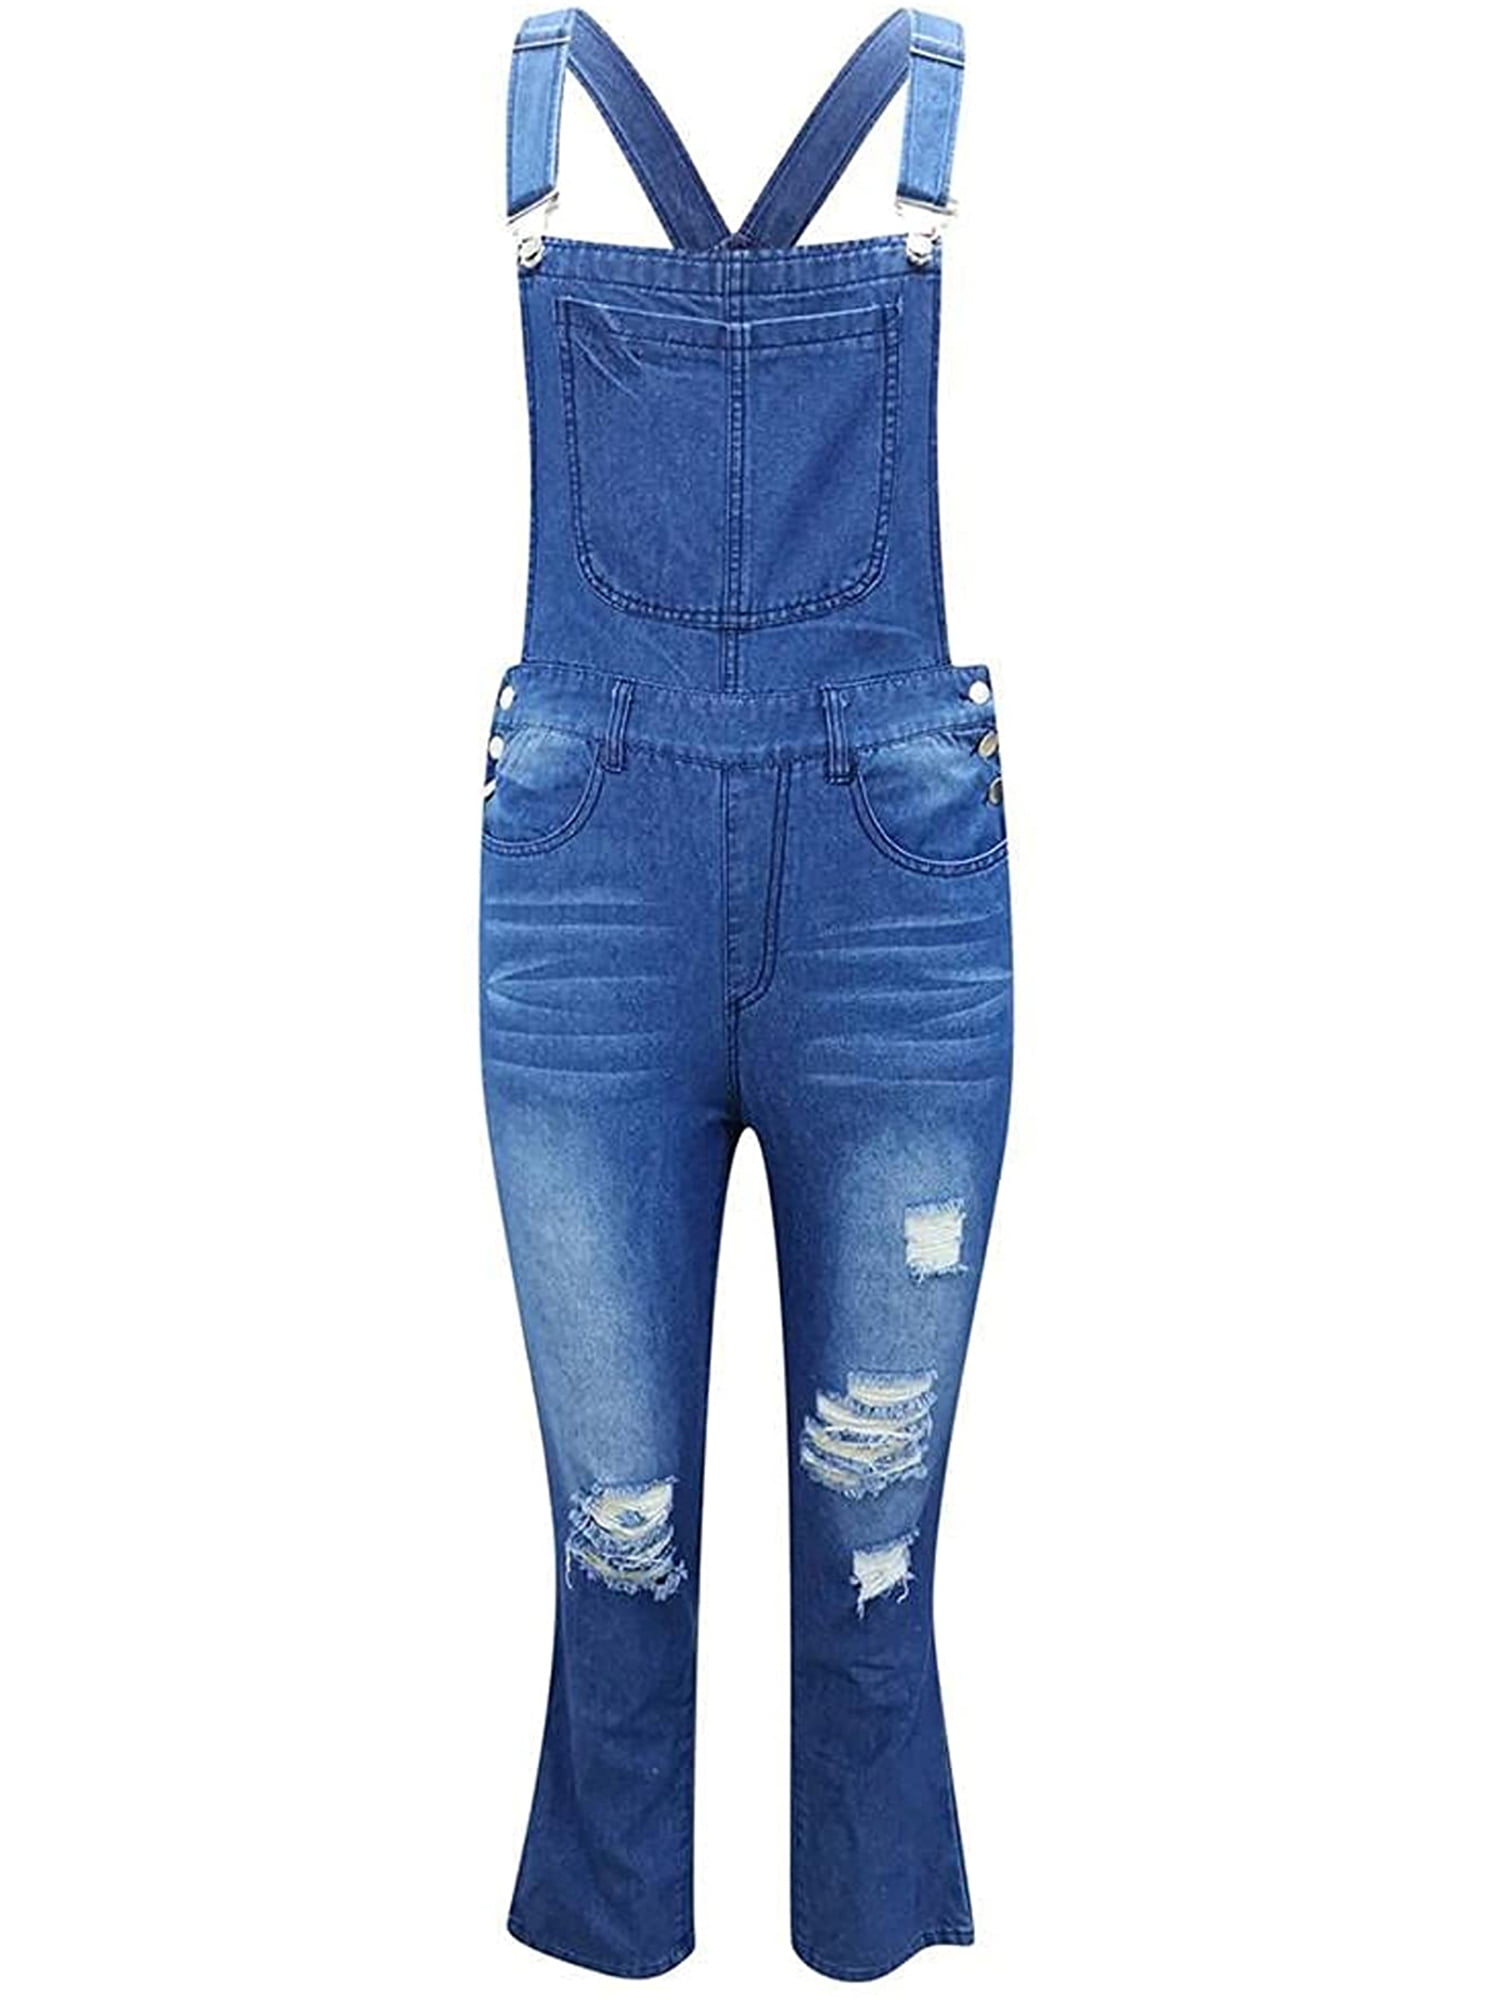 Pencil Fit Jeans For Girls - Buy Pencil Fit Jeans For Girls online in India